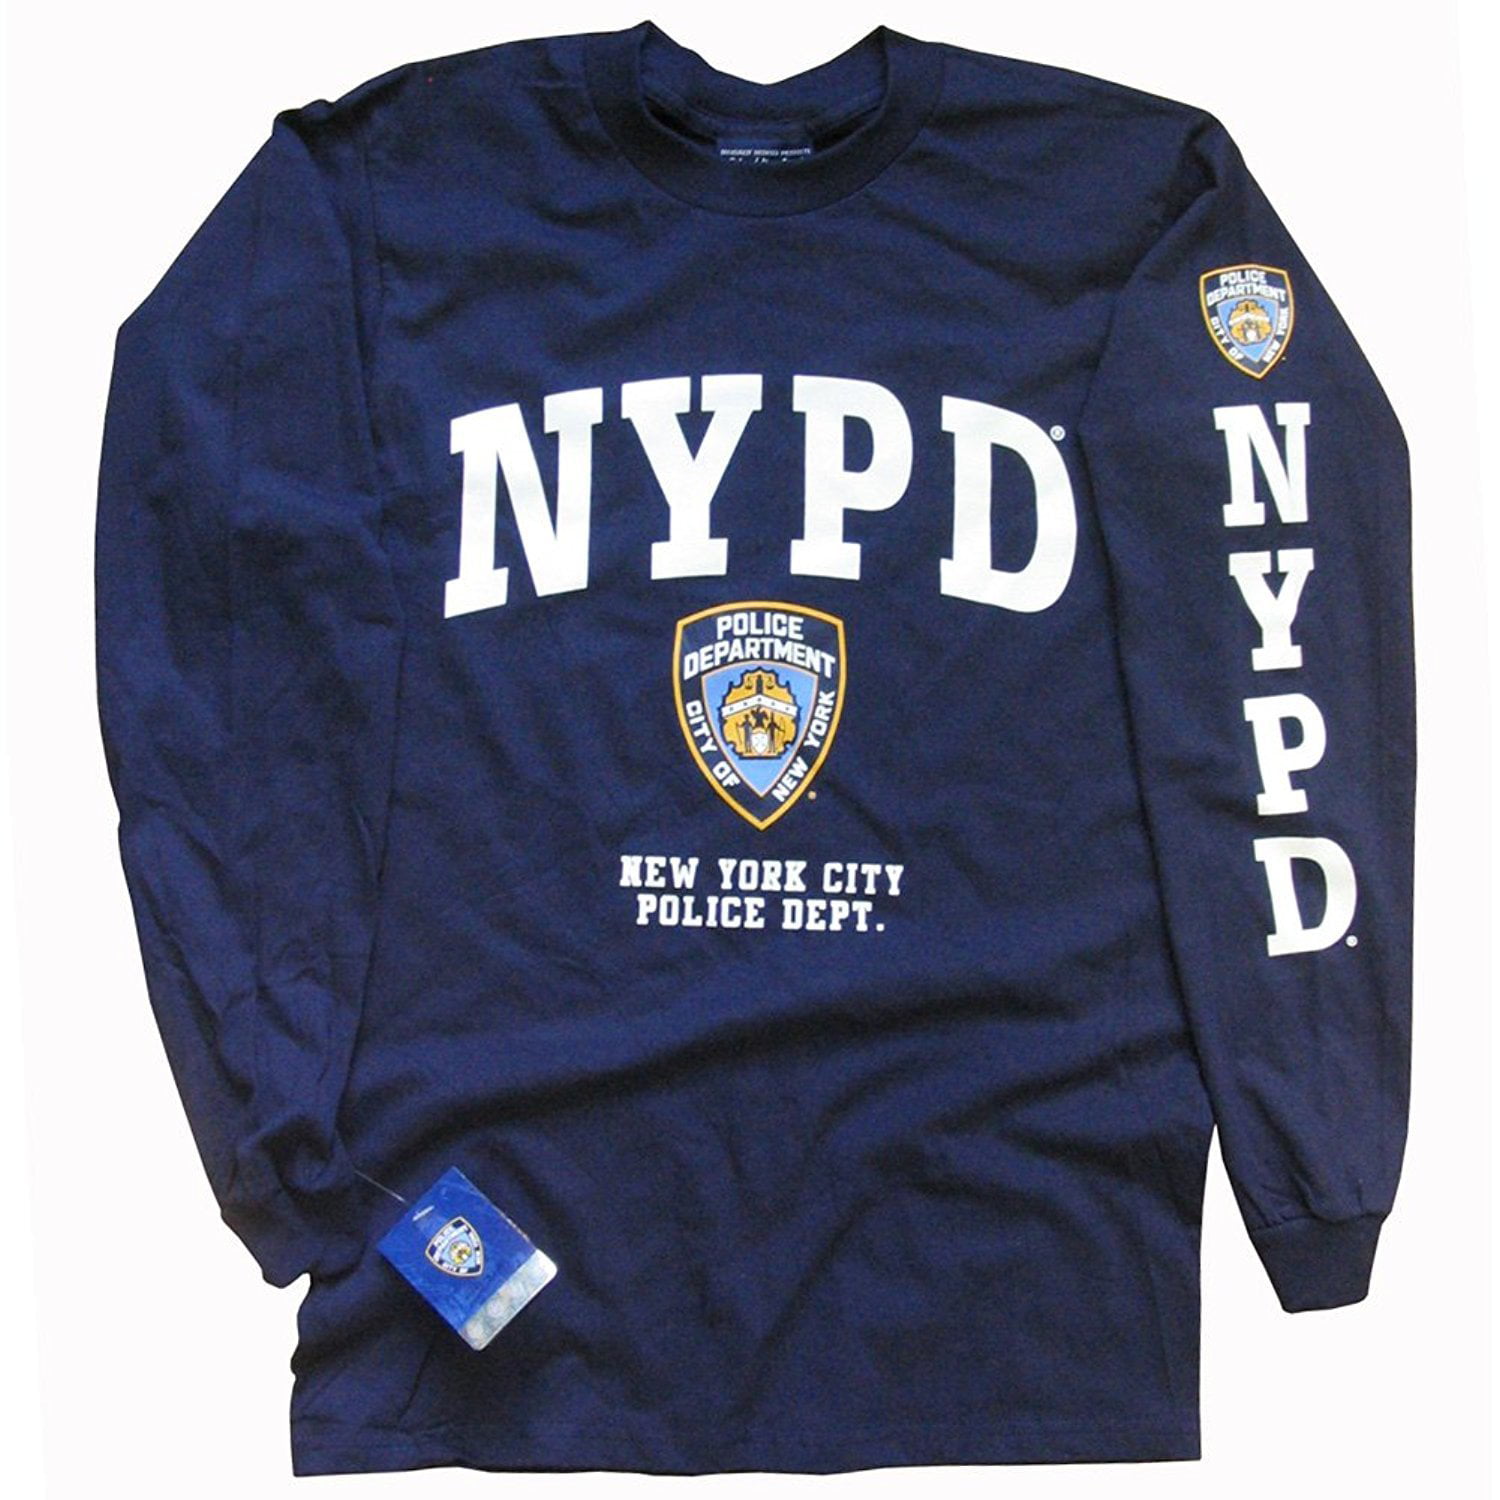 New York NYPD T-Shirt Police Department Athletic Tee Gray